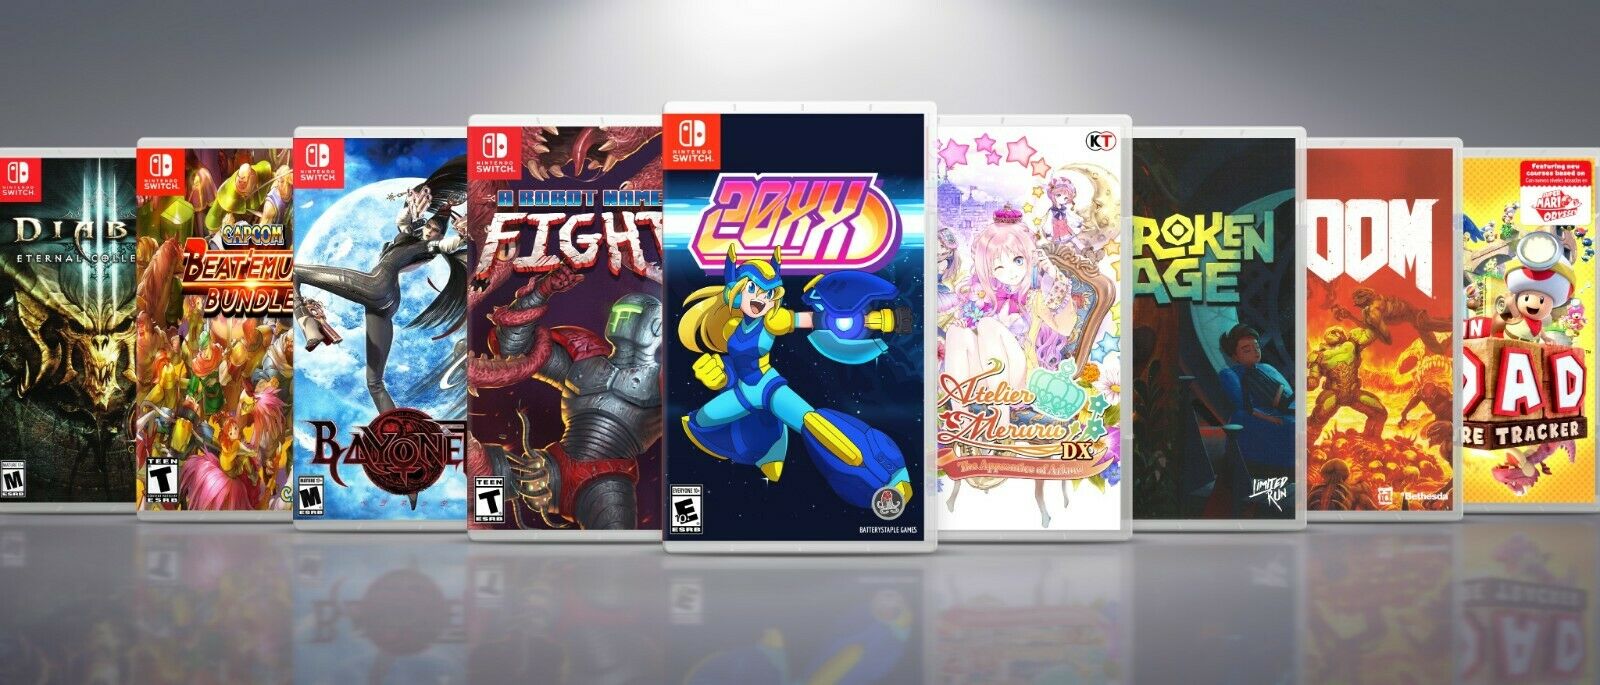 Custom Nintendo Switch Covers And Cases: Titles #-e. !! No Games !!